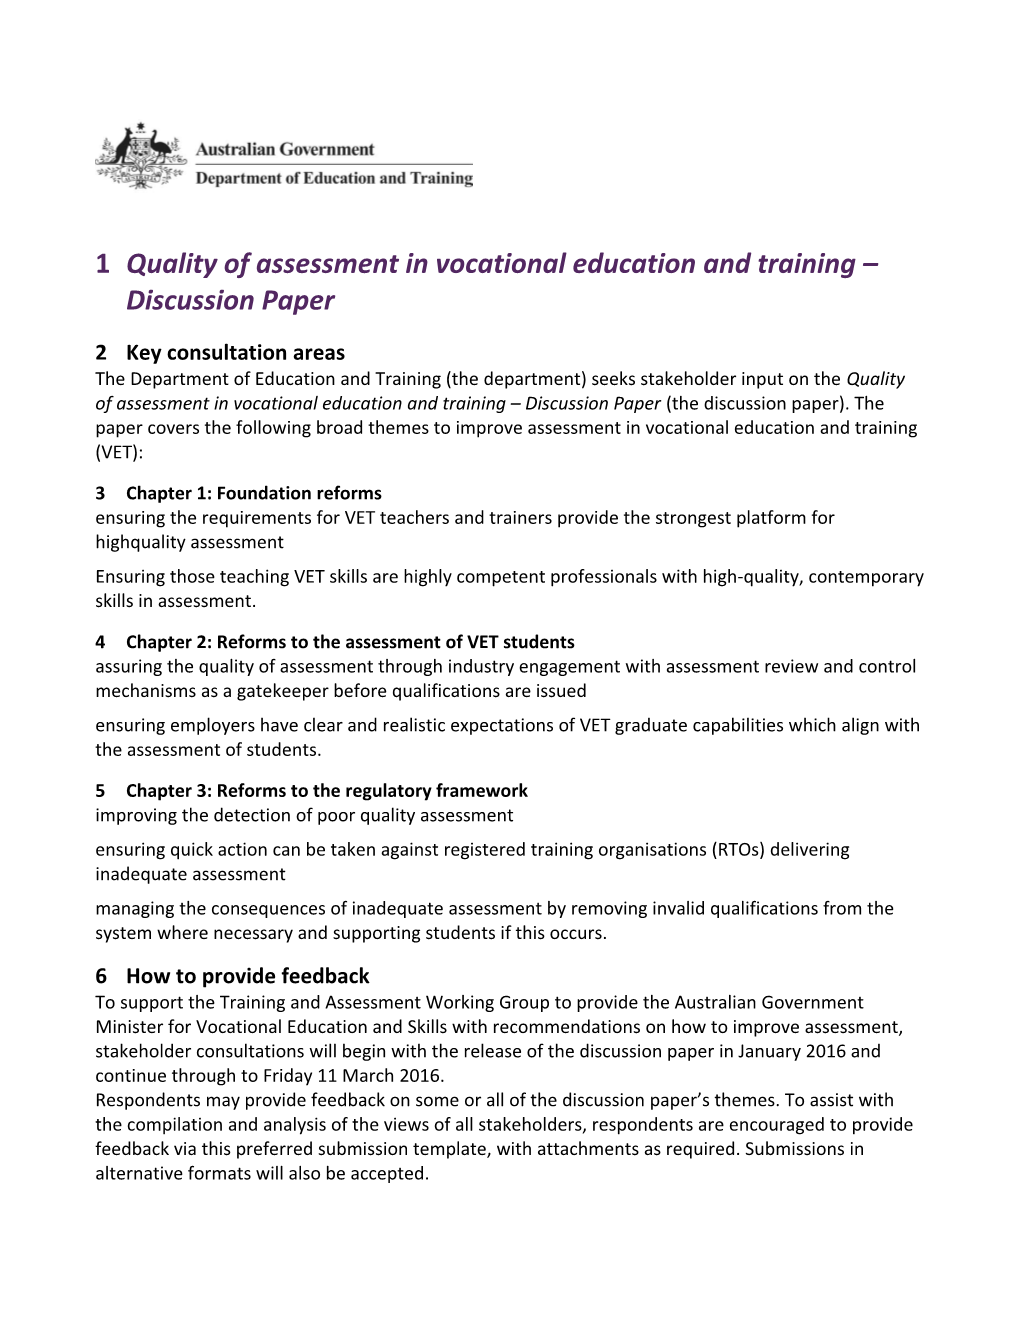 Quality of Assessment in Vocational Education and Training Discussion Paper